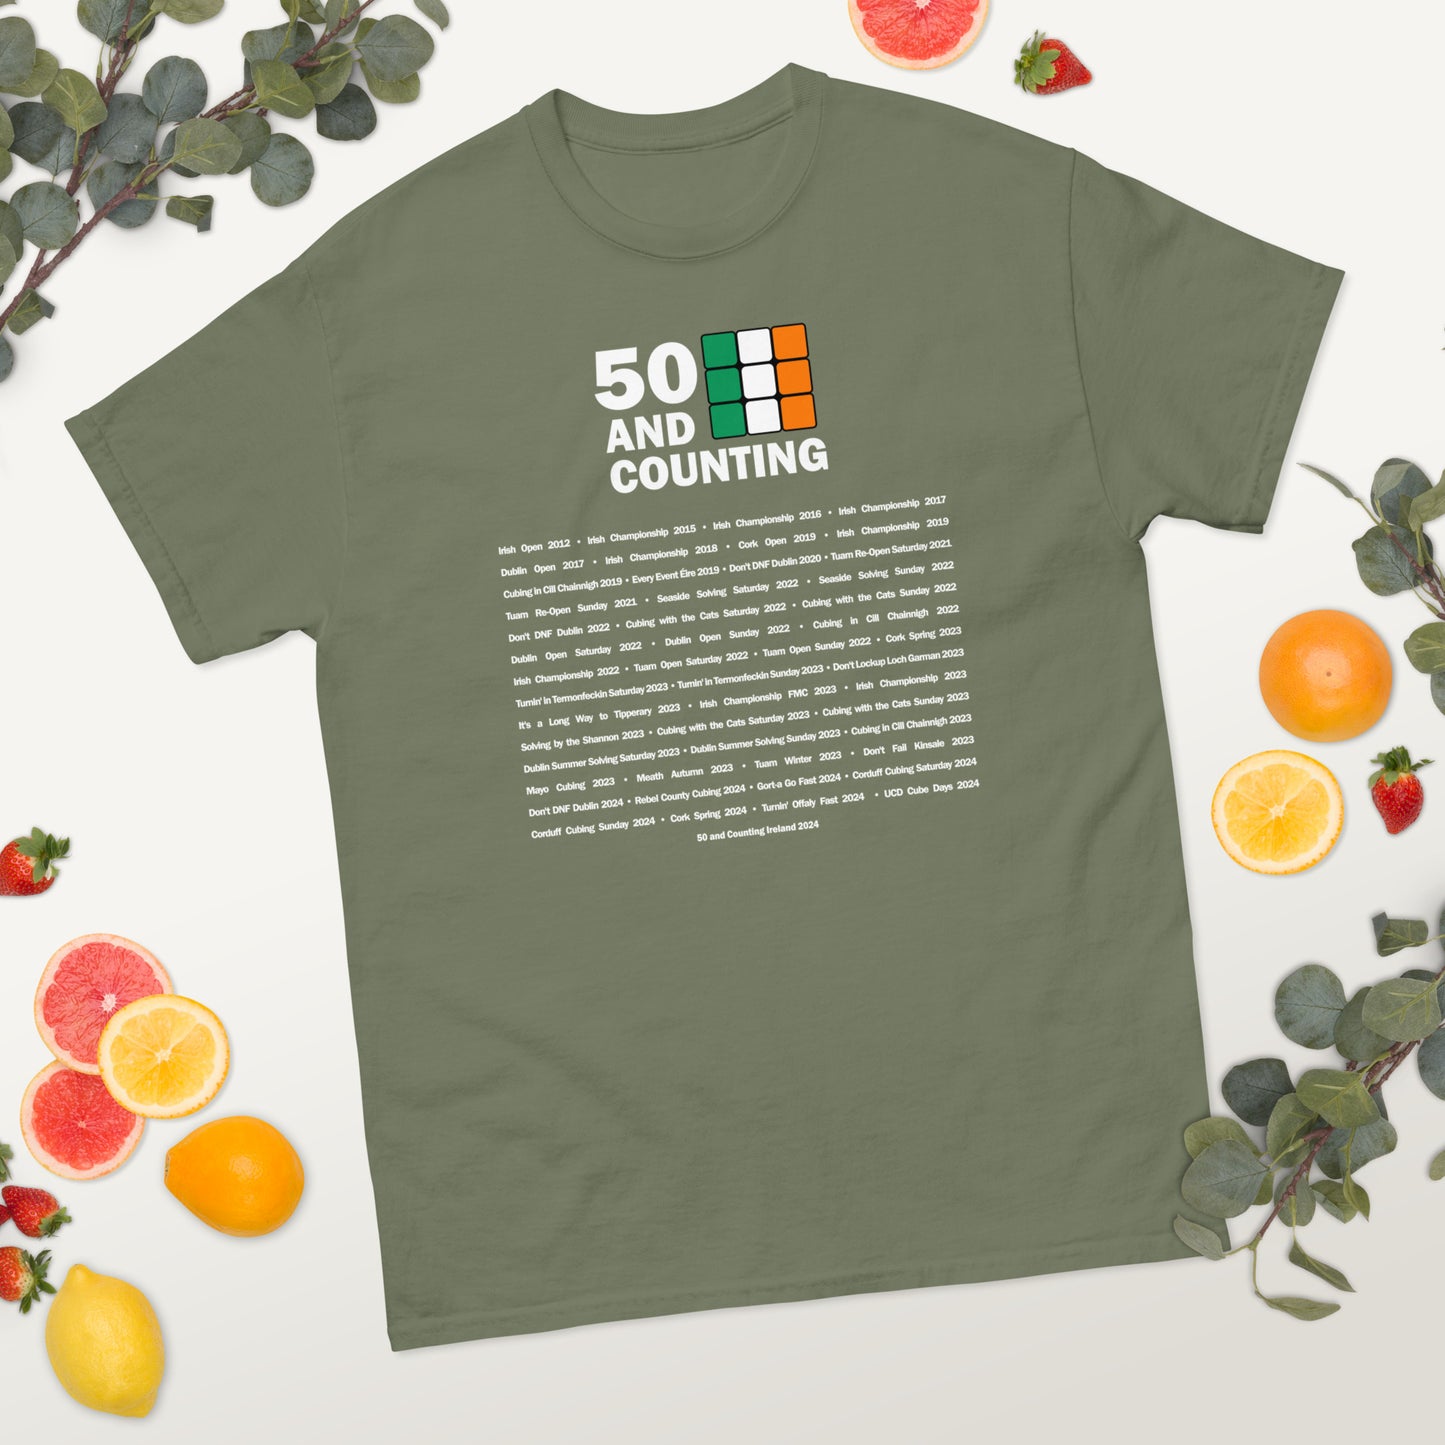 50 Comps TShirt (Dark) | 50 and Counting